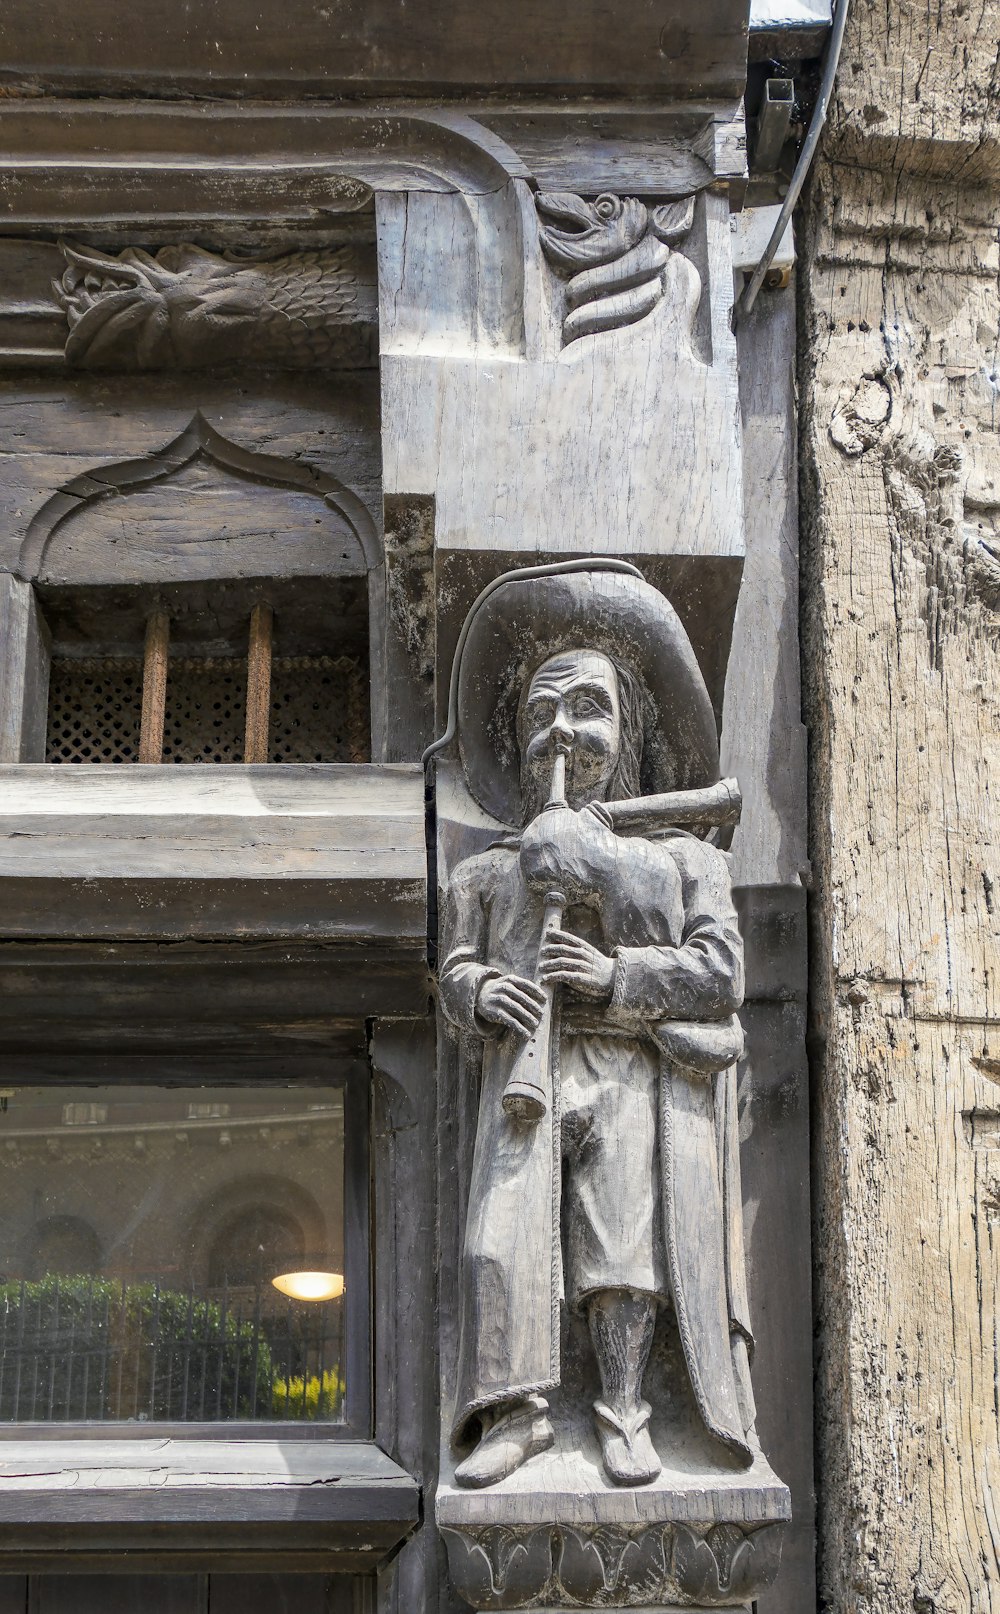 a statue of a man holding a bird on the side of a building